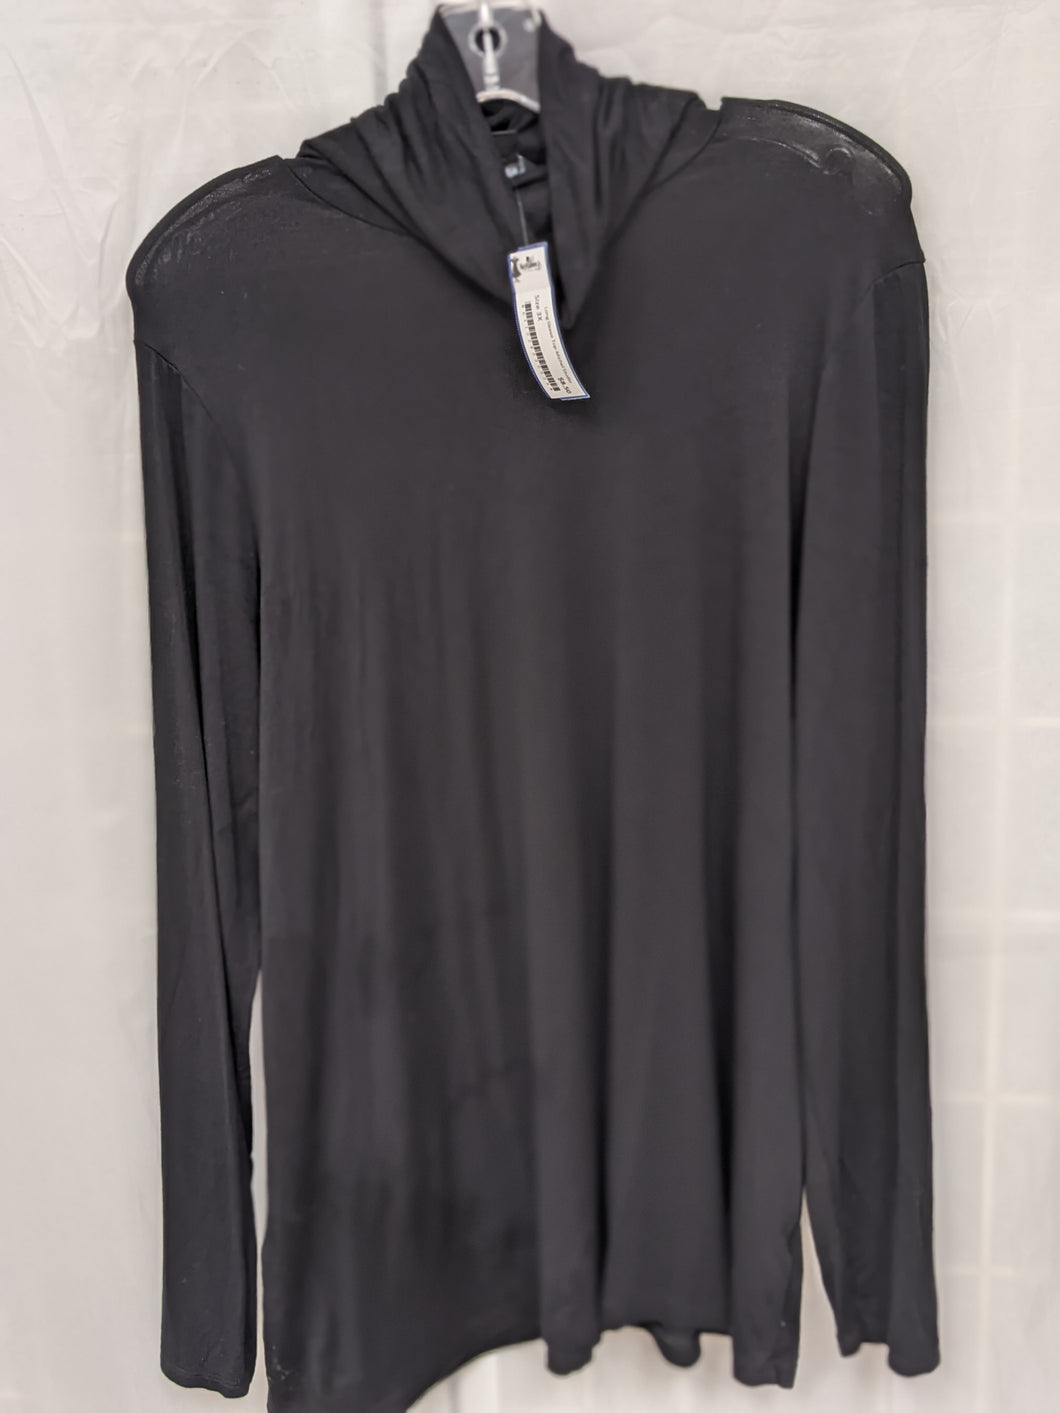 Long Sleeve Top - Size 4